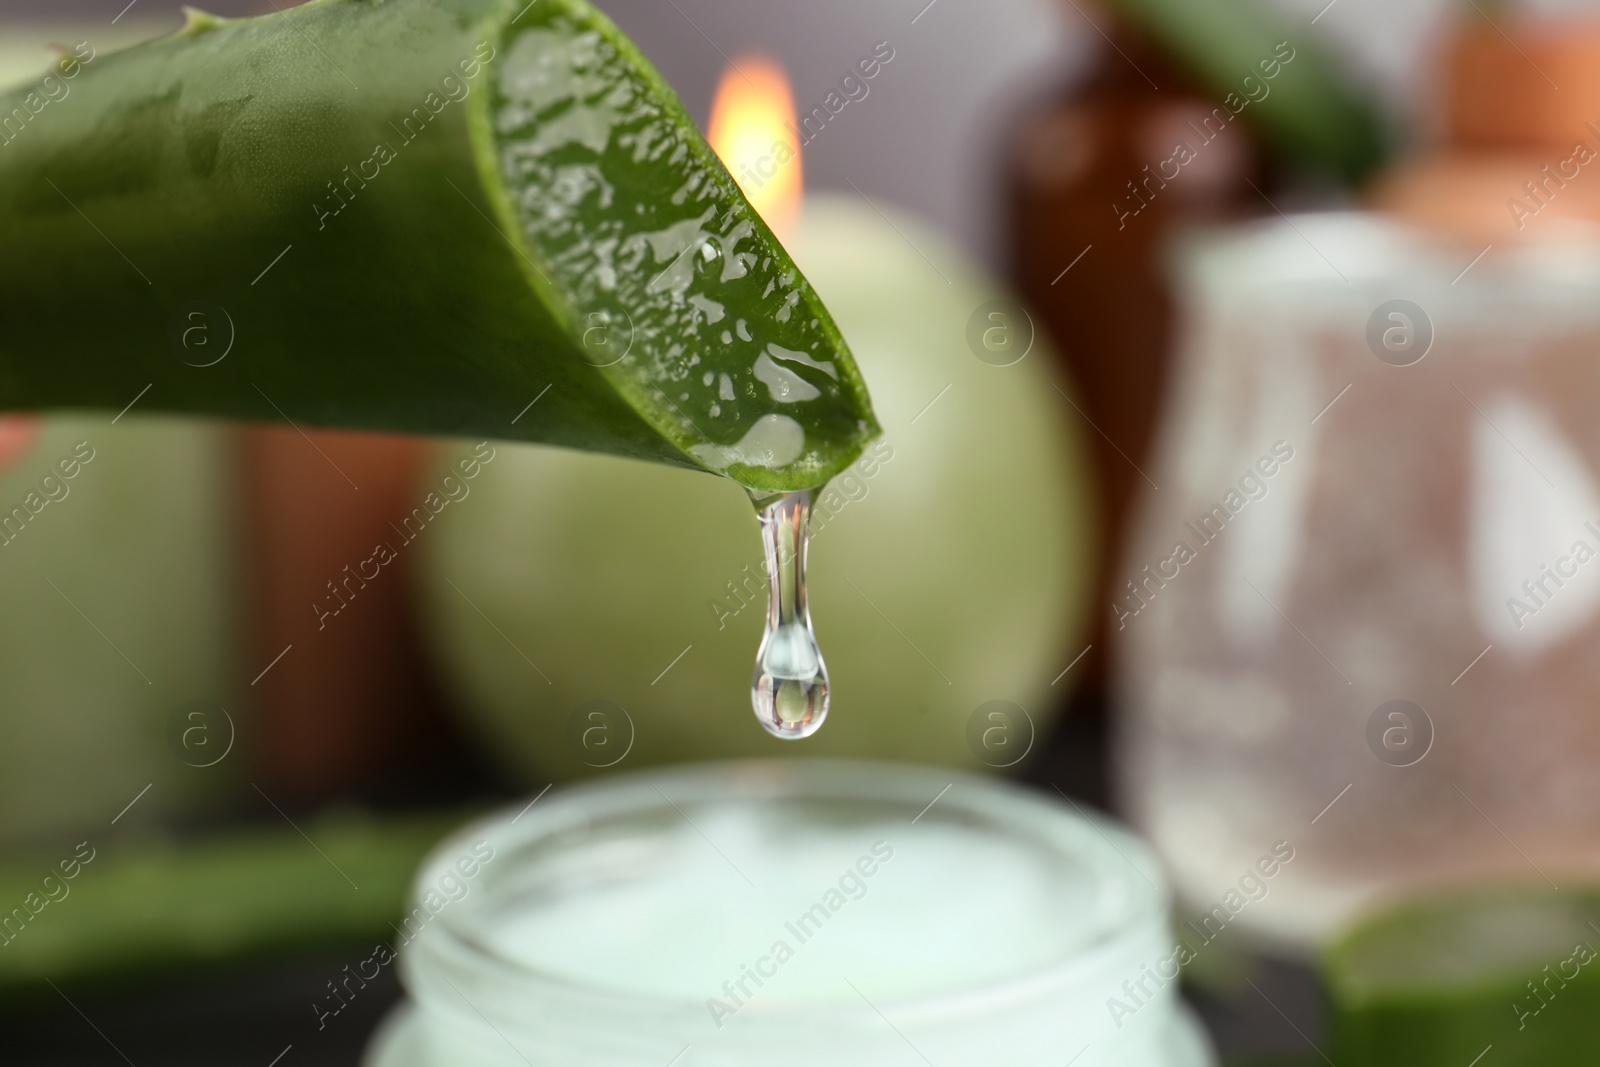 Photo of Aloe vera leaf with dripping gel against blurred background, closeup